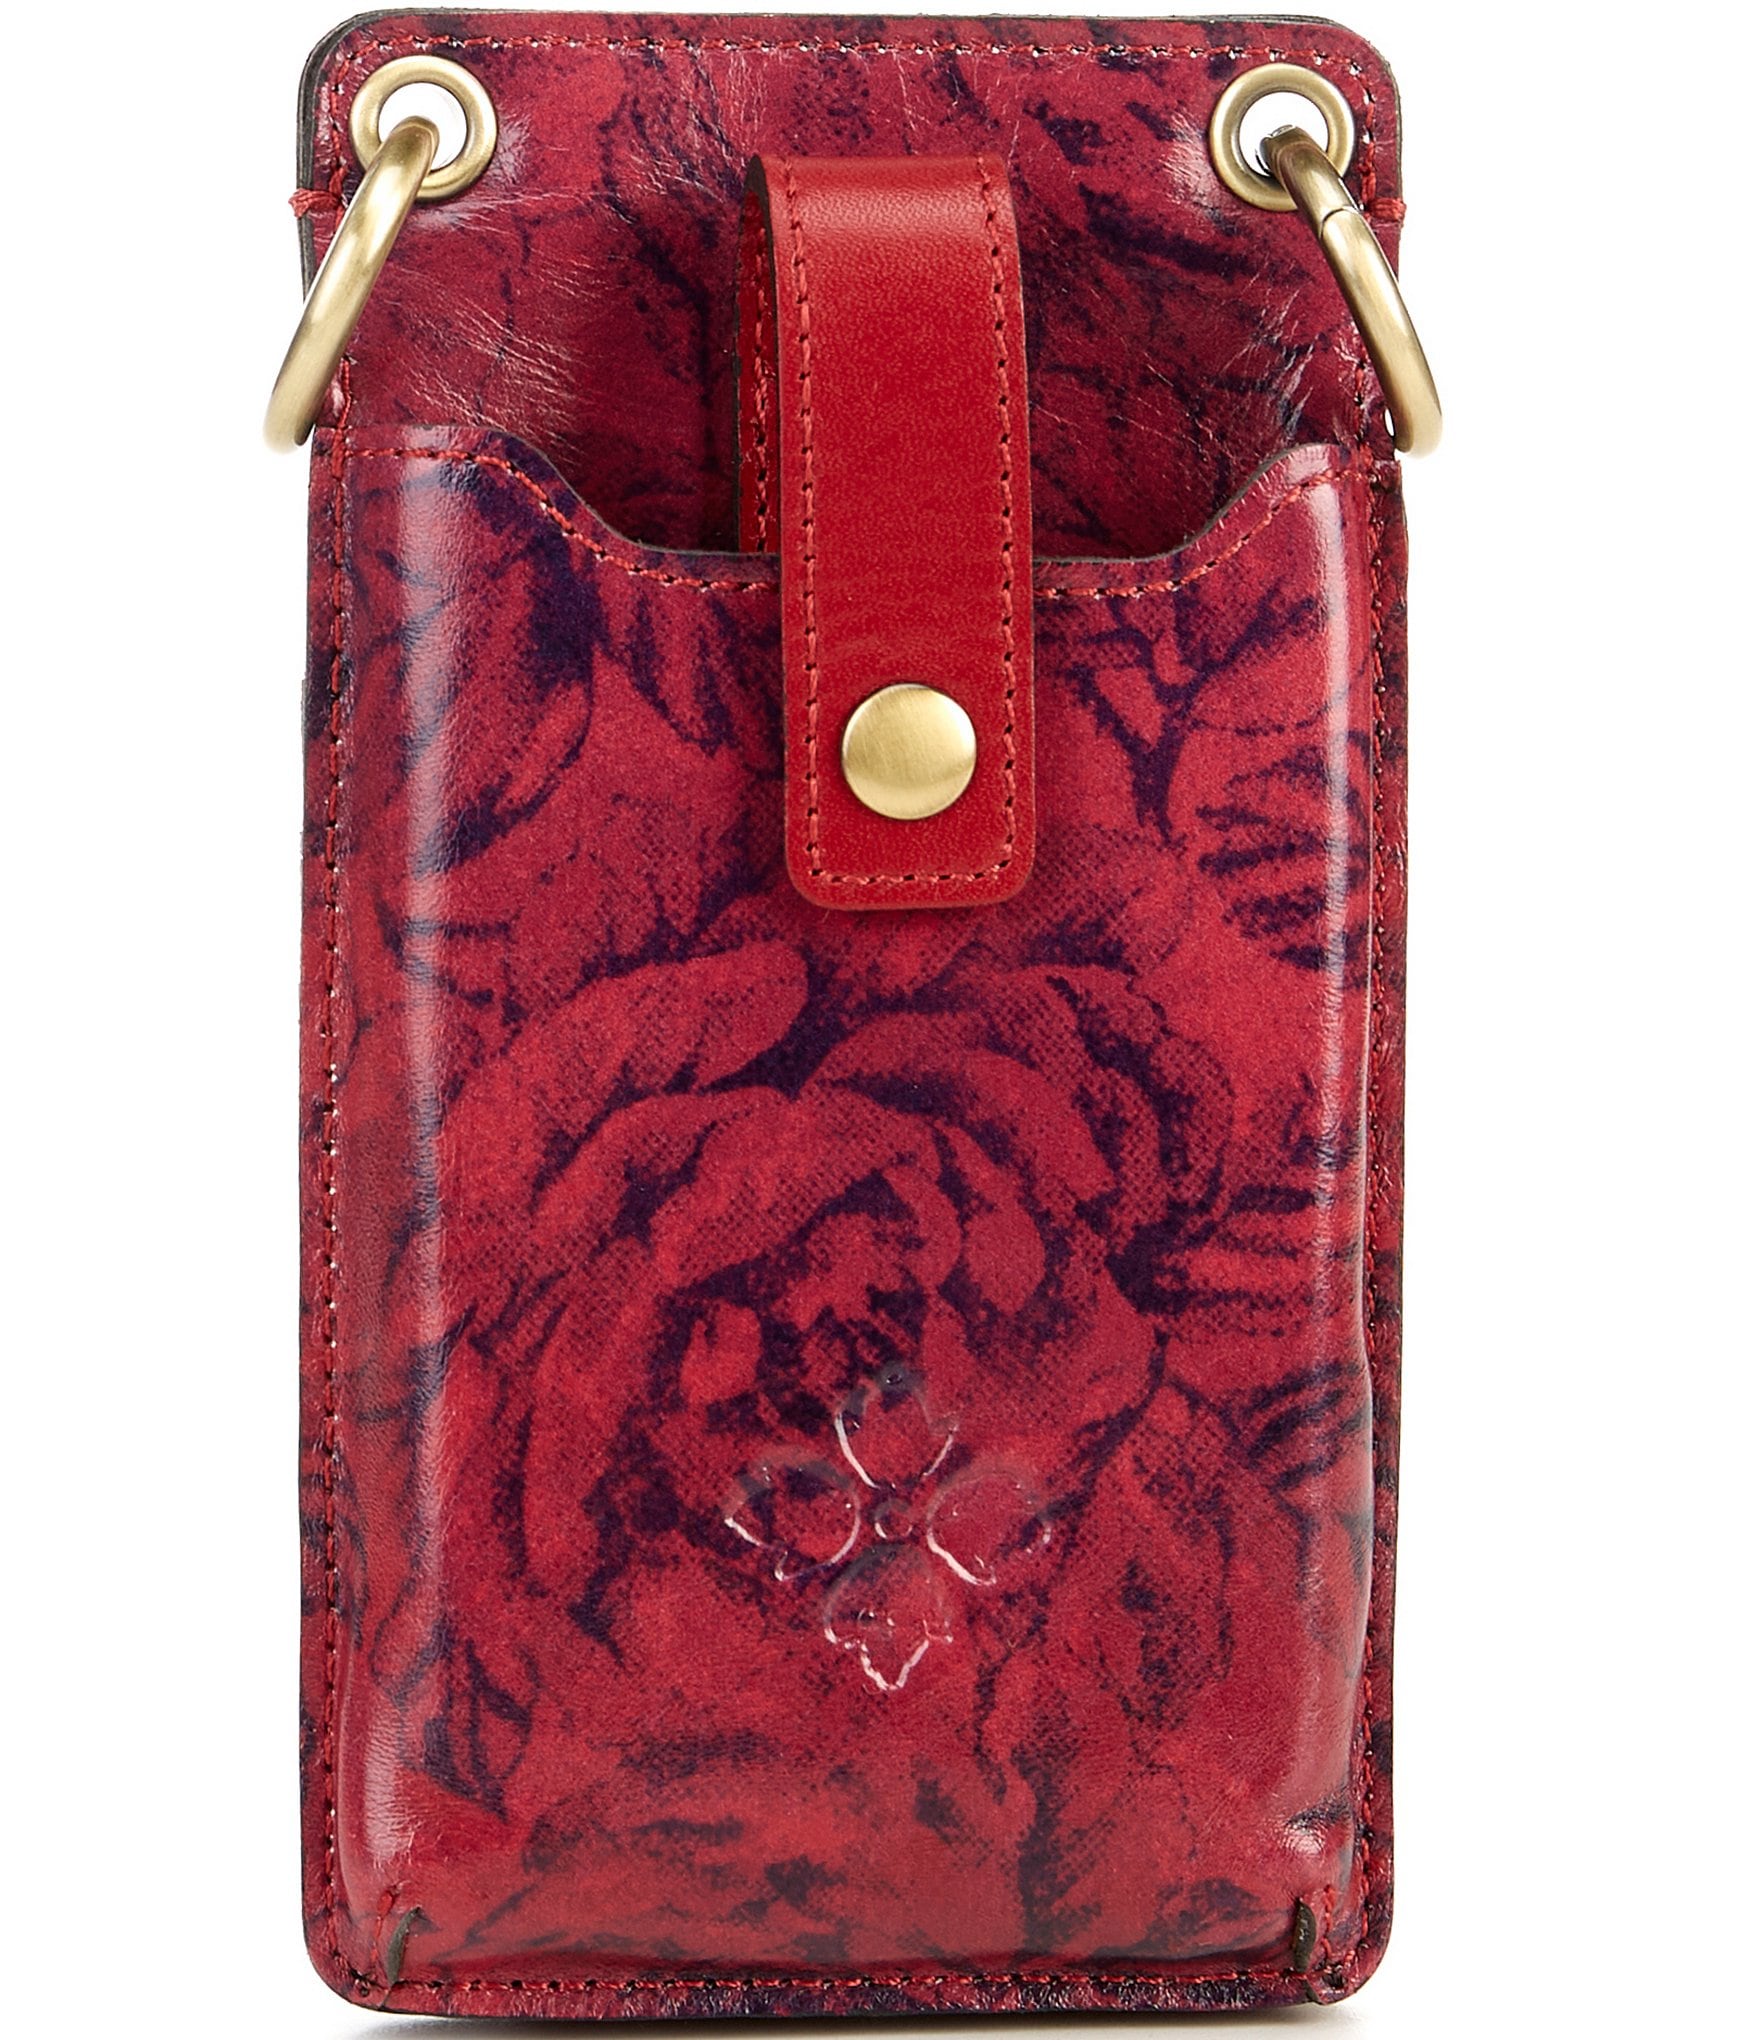 Patricia Nash Farleigh Etched Roses Leather Phone Crossbody Dillard's